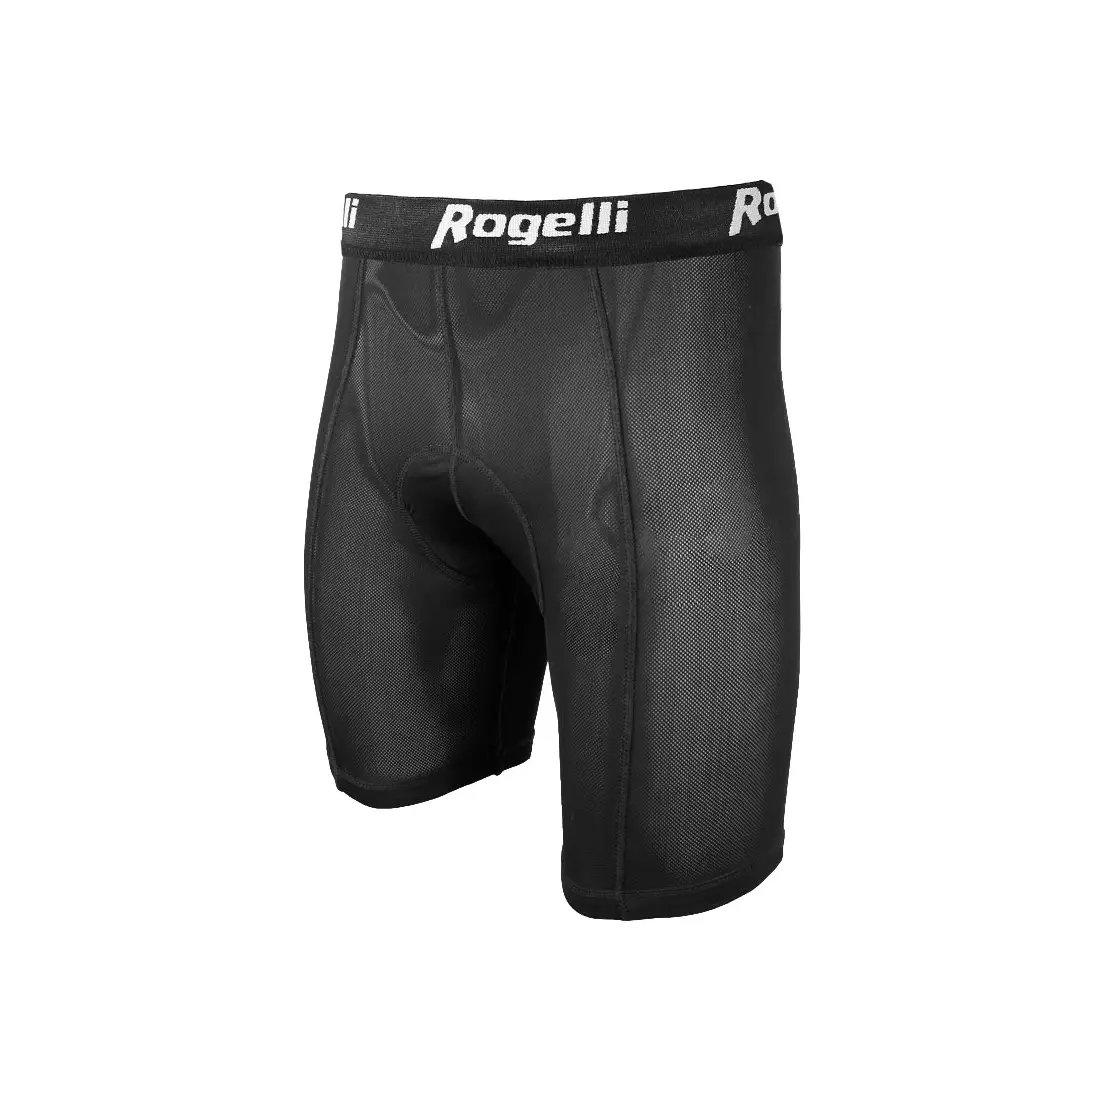 ROGELLI NAVELLI - bicycle boxer shorts for shorts